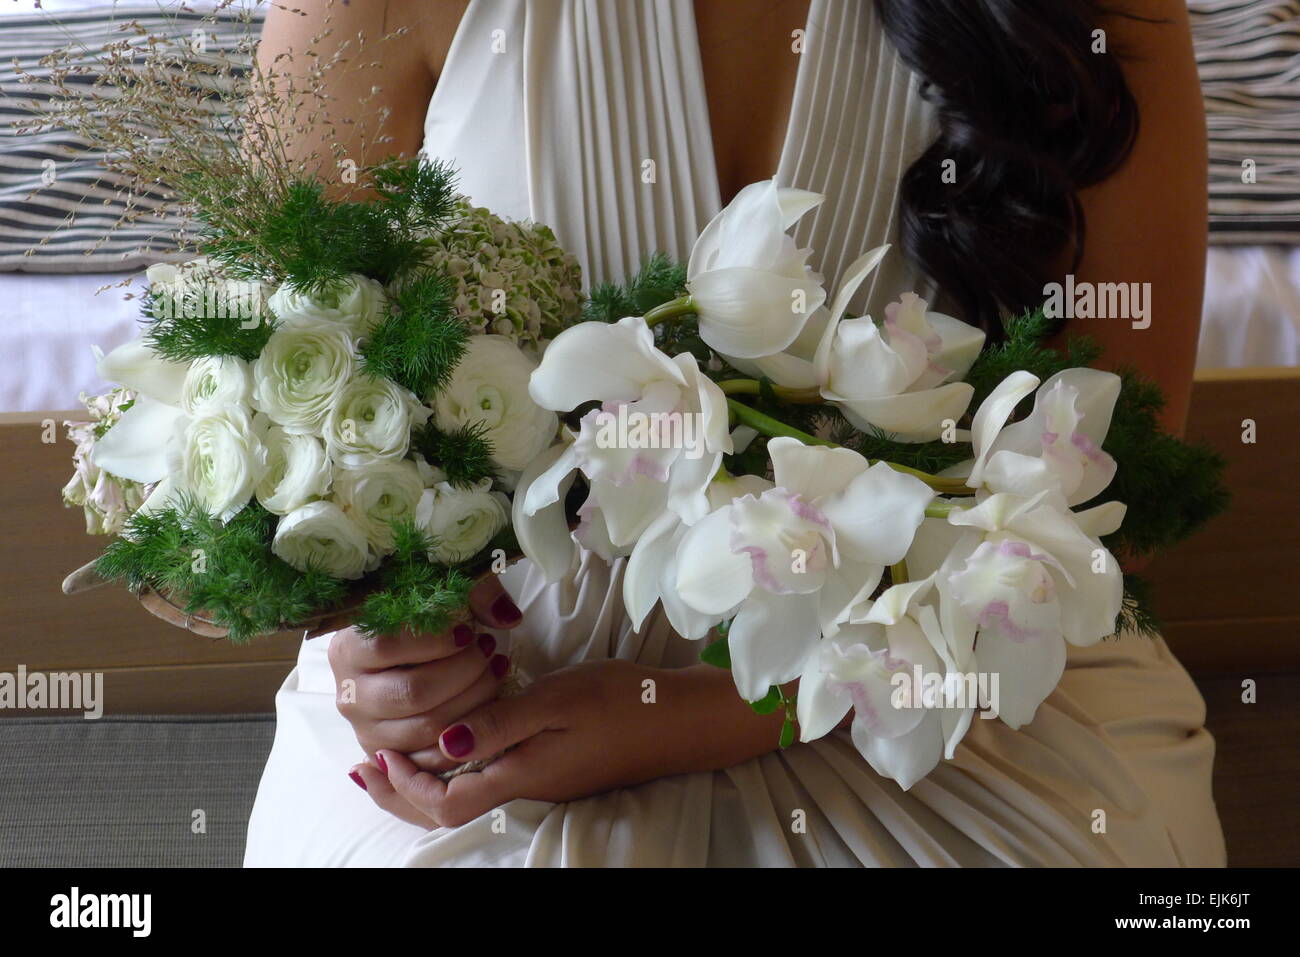 woman holding wedding bouquet with white orchids Stock Photo